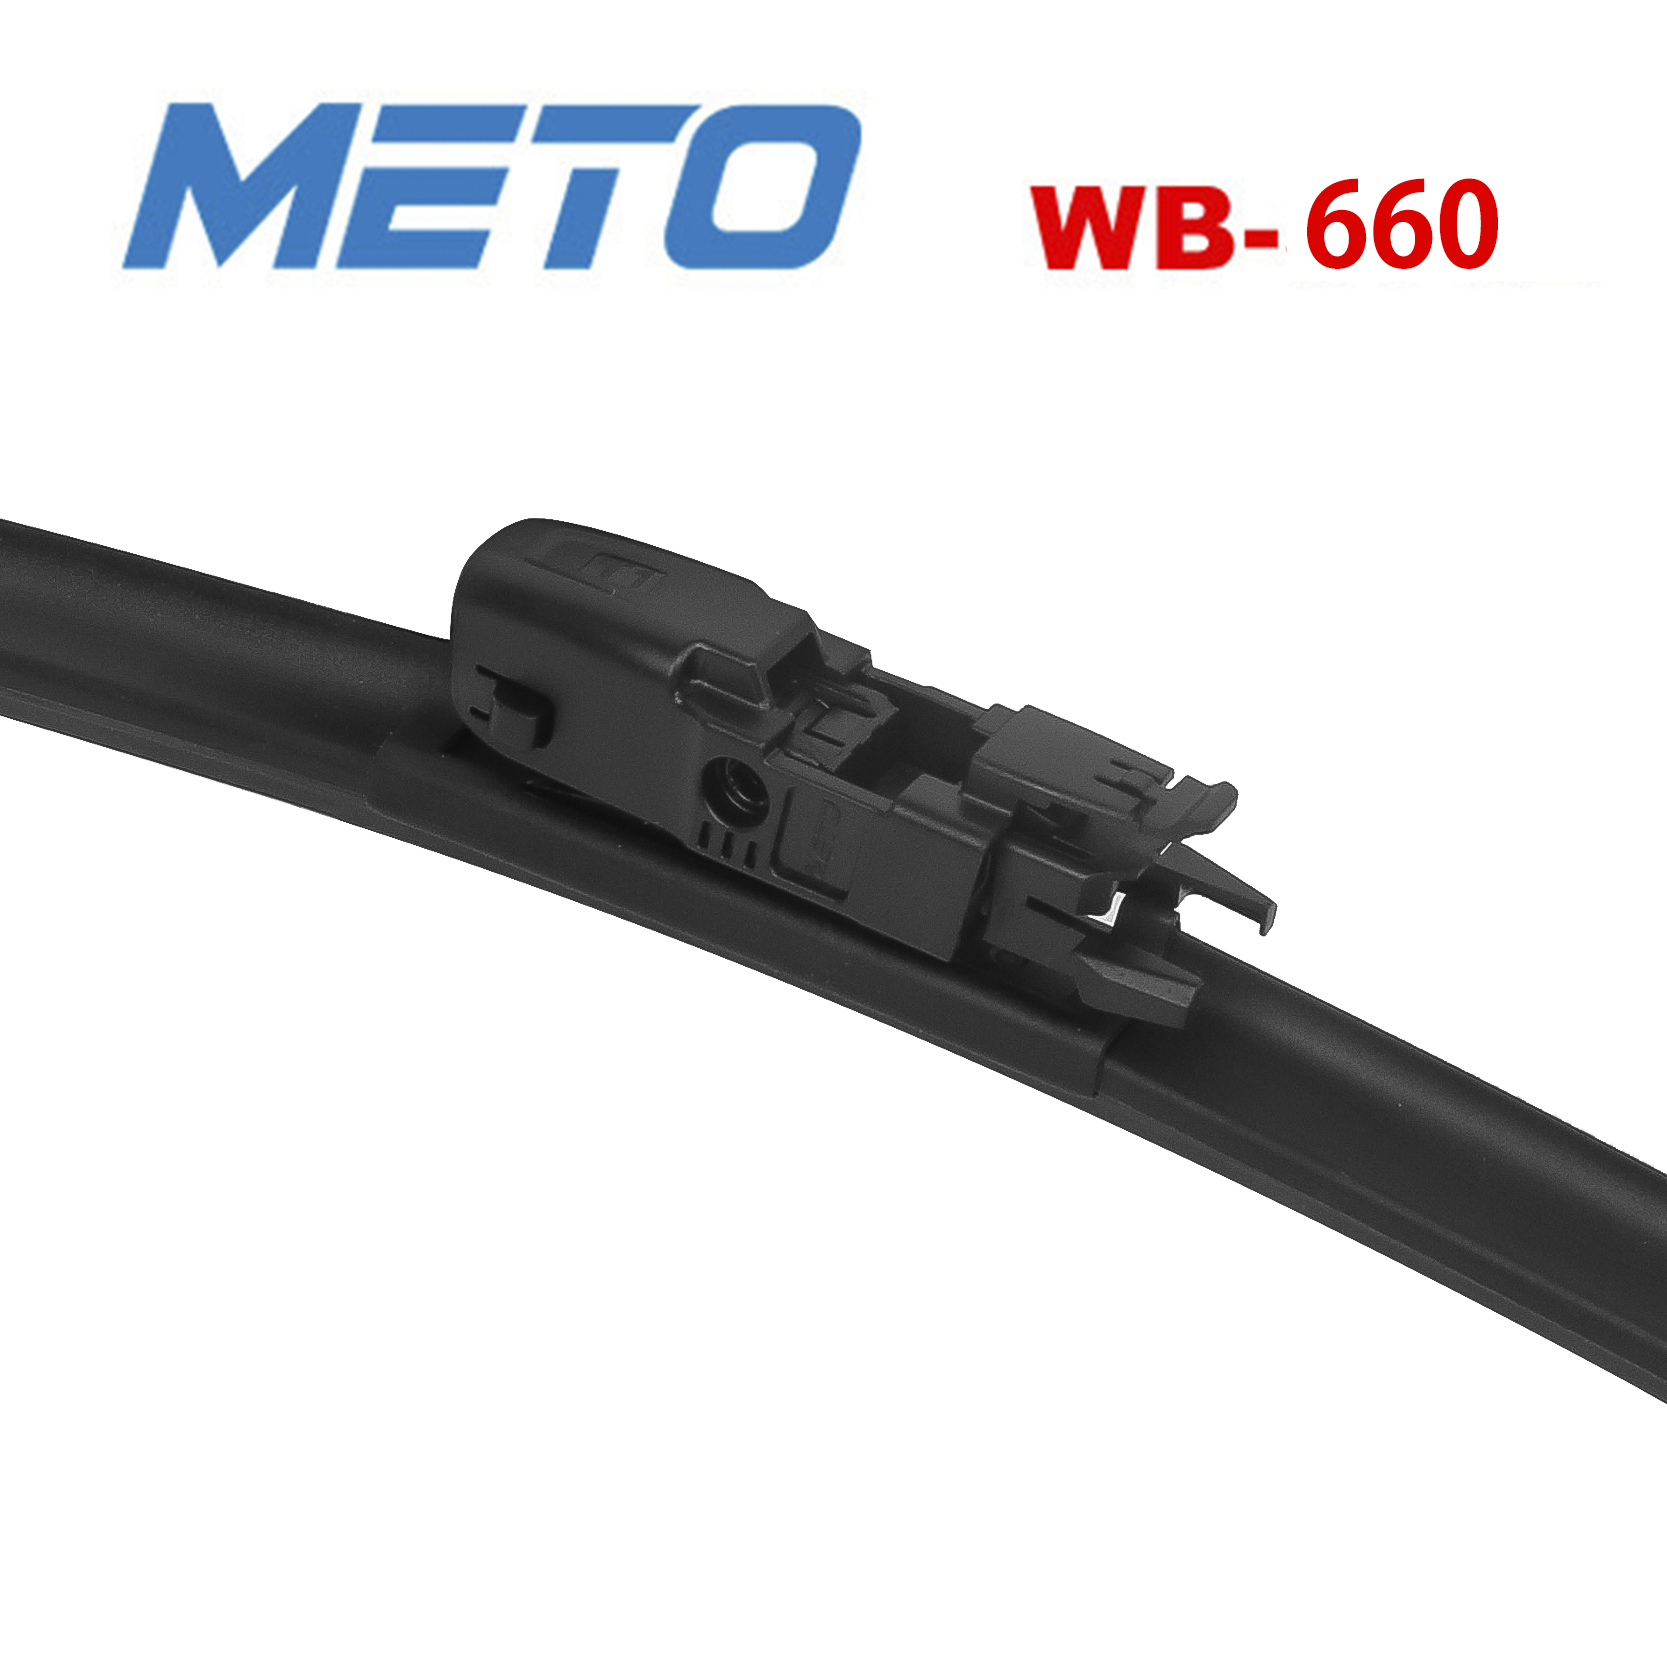 Multifunctional Good Year type 3 all in 1 wipers